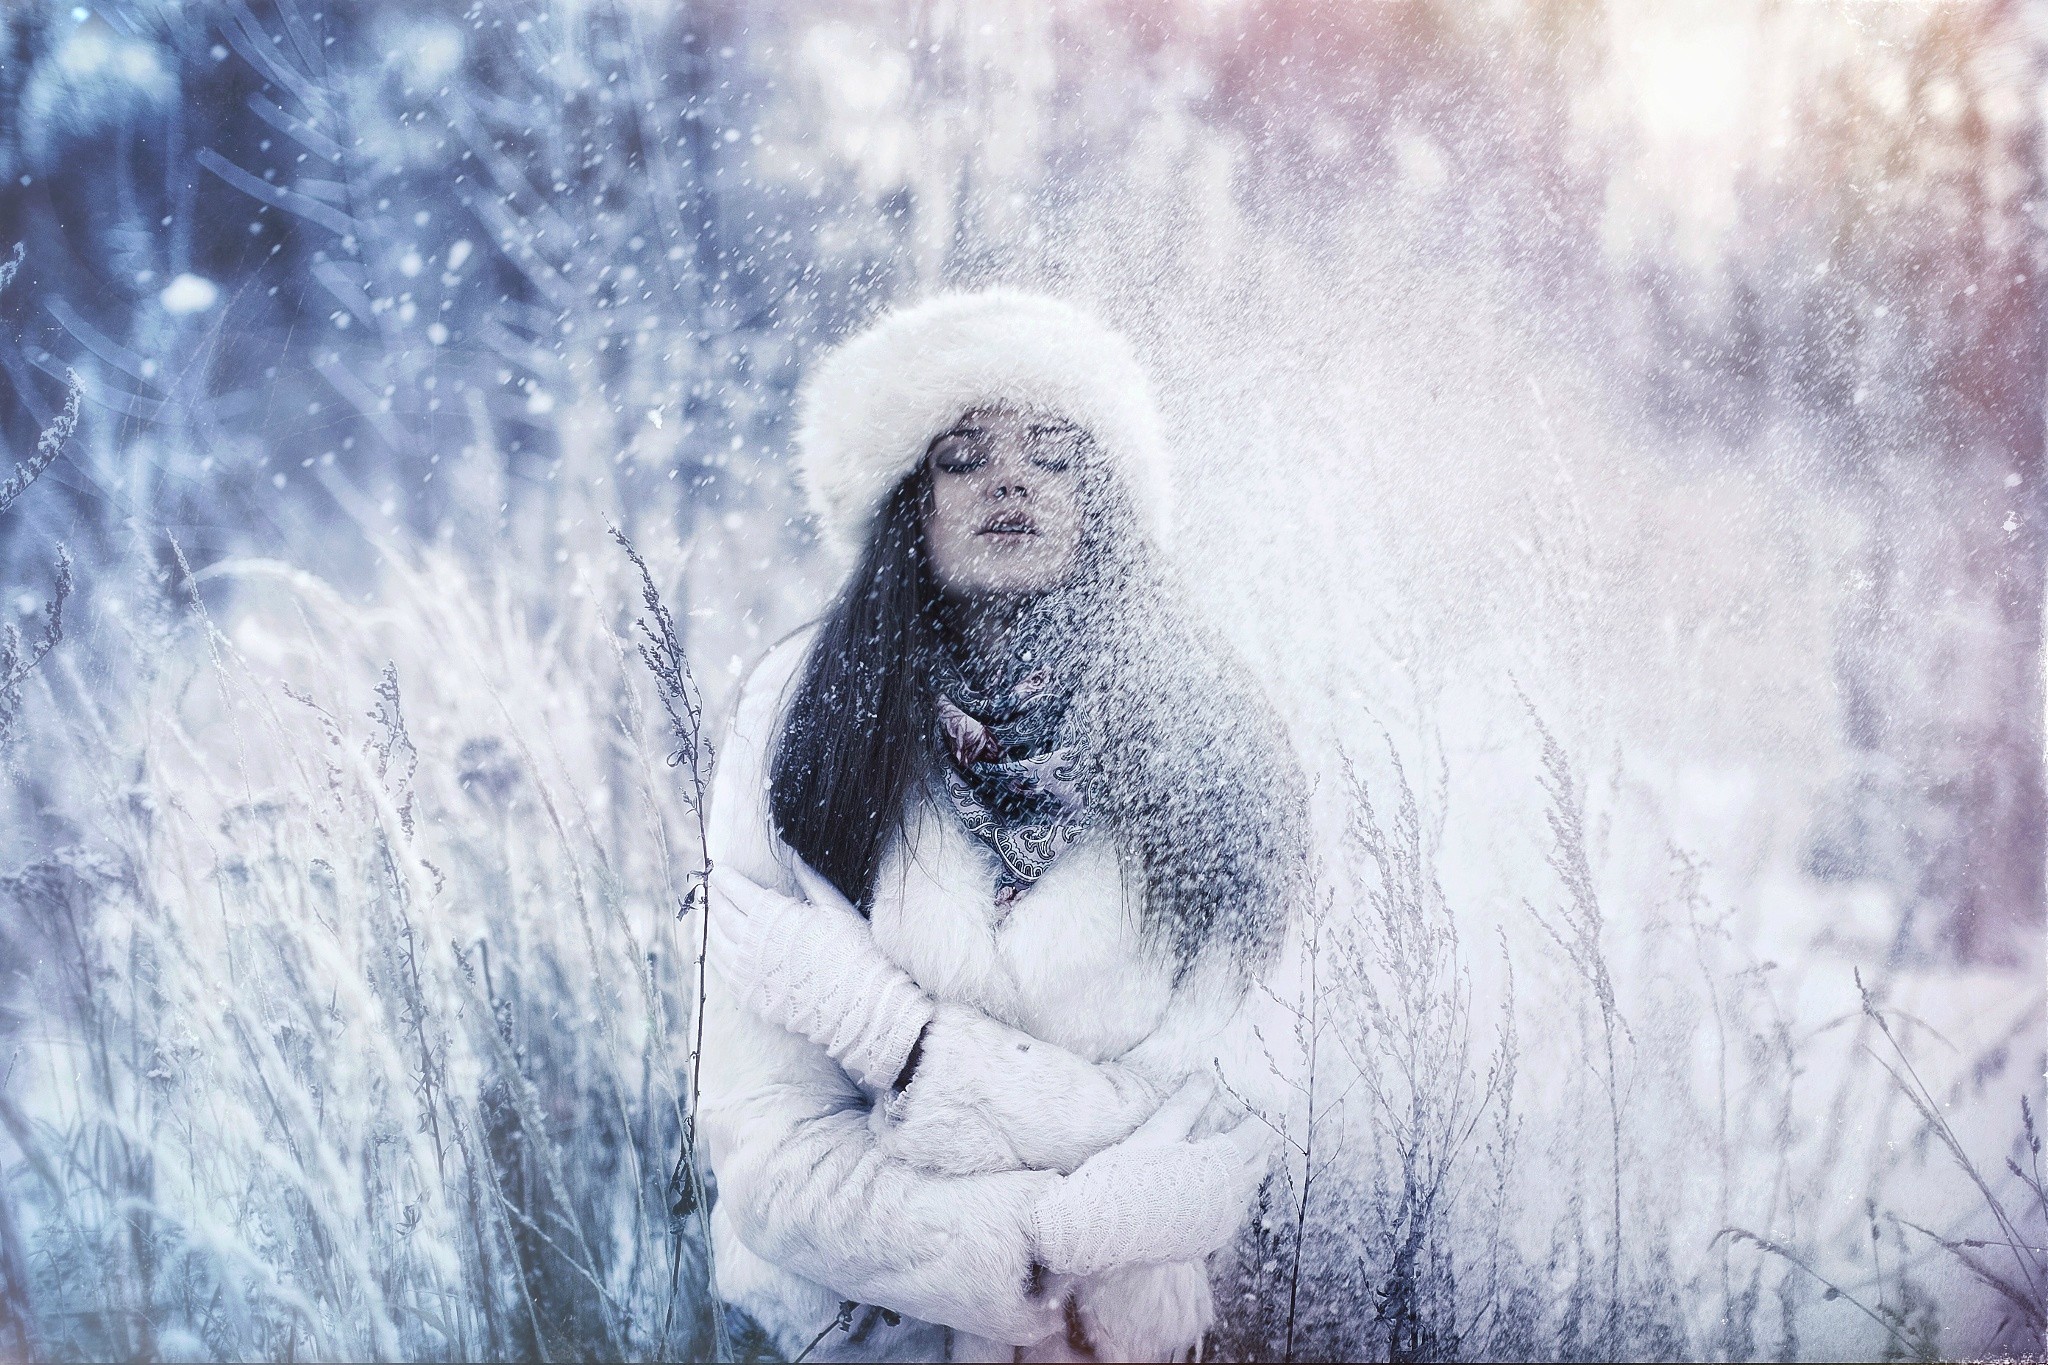 People 2048x1365 women snow brunette long hair model winter grass cold arms crossed outdoors women outdoors